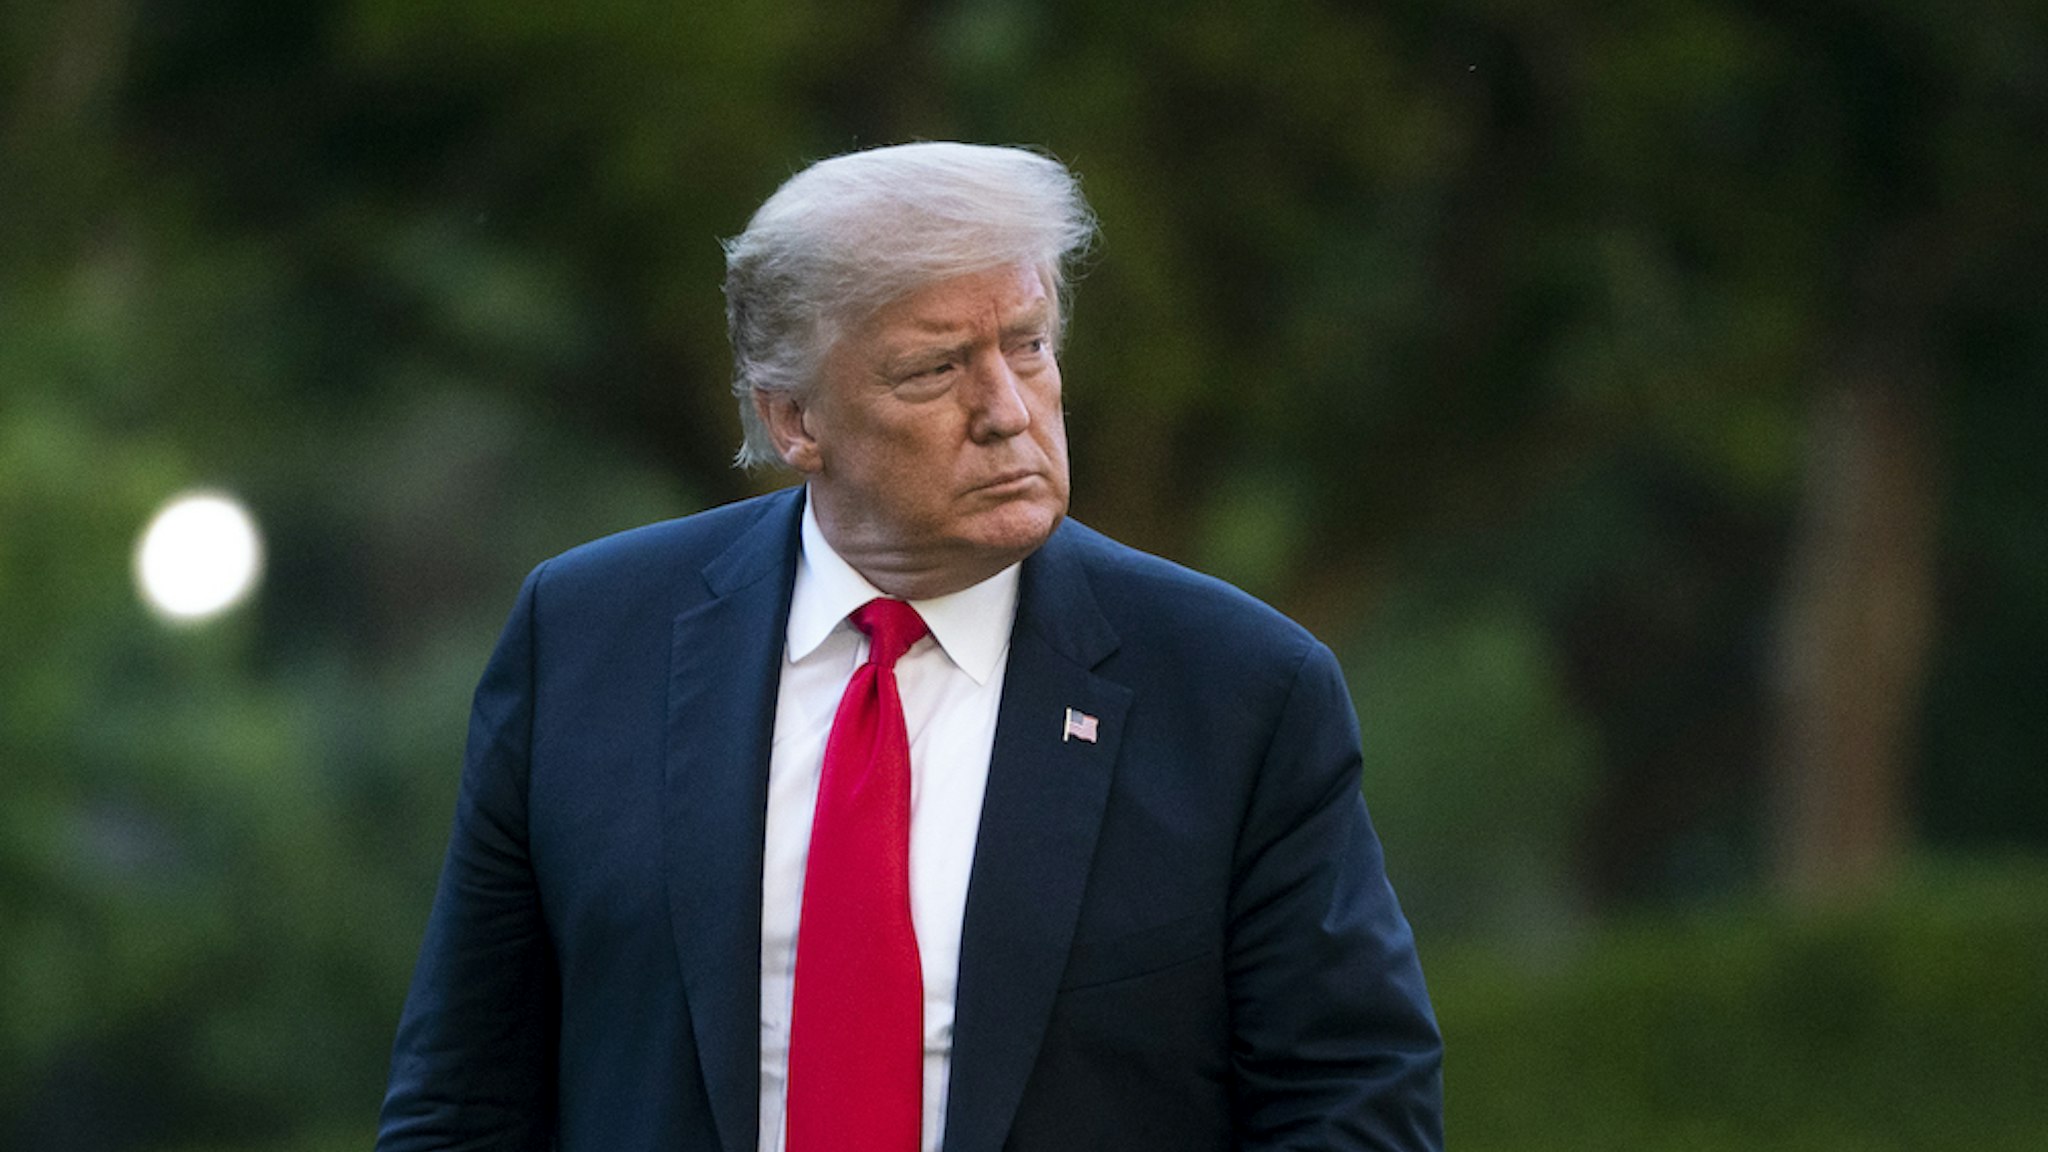 U.S. President Donald Trump walks to the White House residence after exiting Marine One on the South Lawn on June 25, 2020 in Washington, DC. President Trump traveled to Wisconsin on Thursday for a Fox News town hall event and a visit to a shipbuilding manufacturer. (Photo by Drew Angerer/Getty Images)